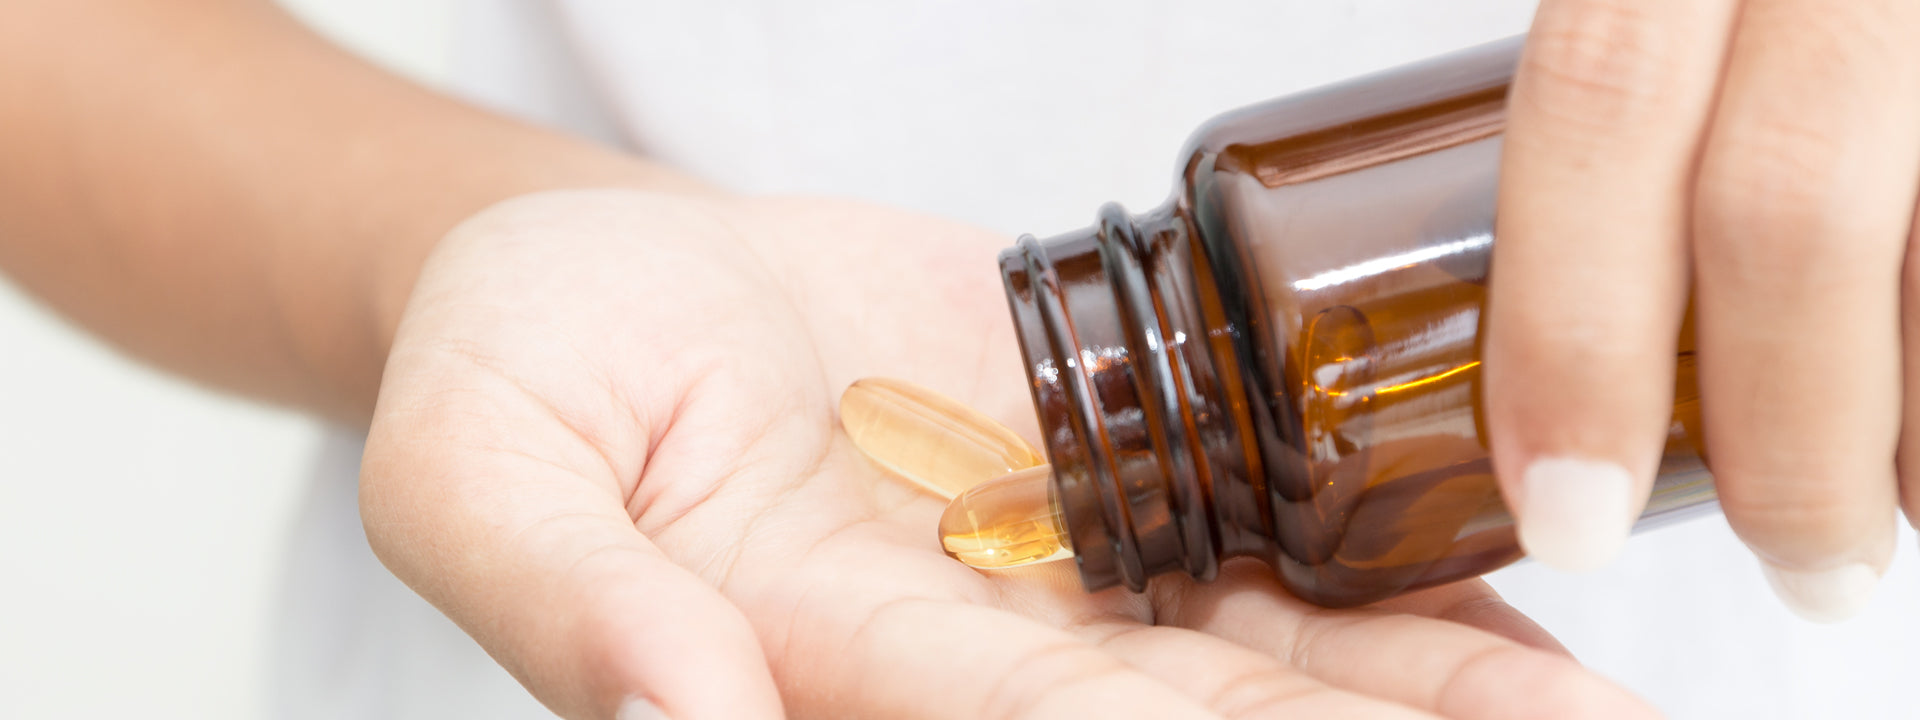 Are You Getting The Full Spectrum Of Fish Oil?